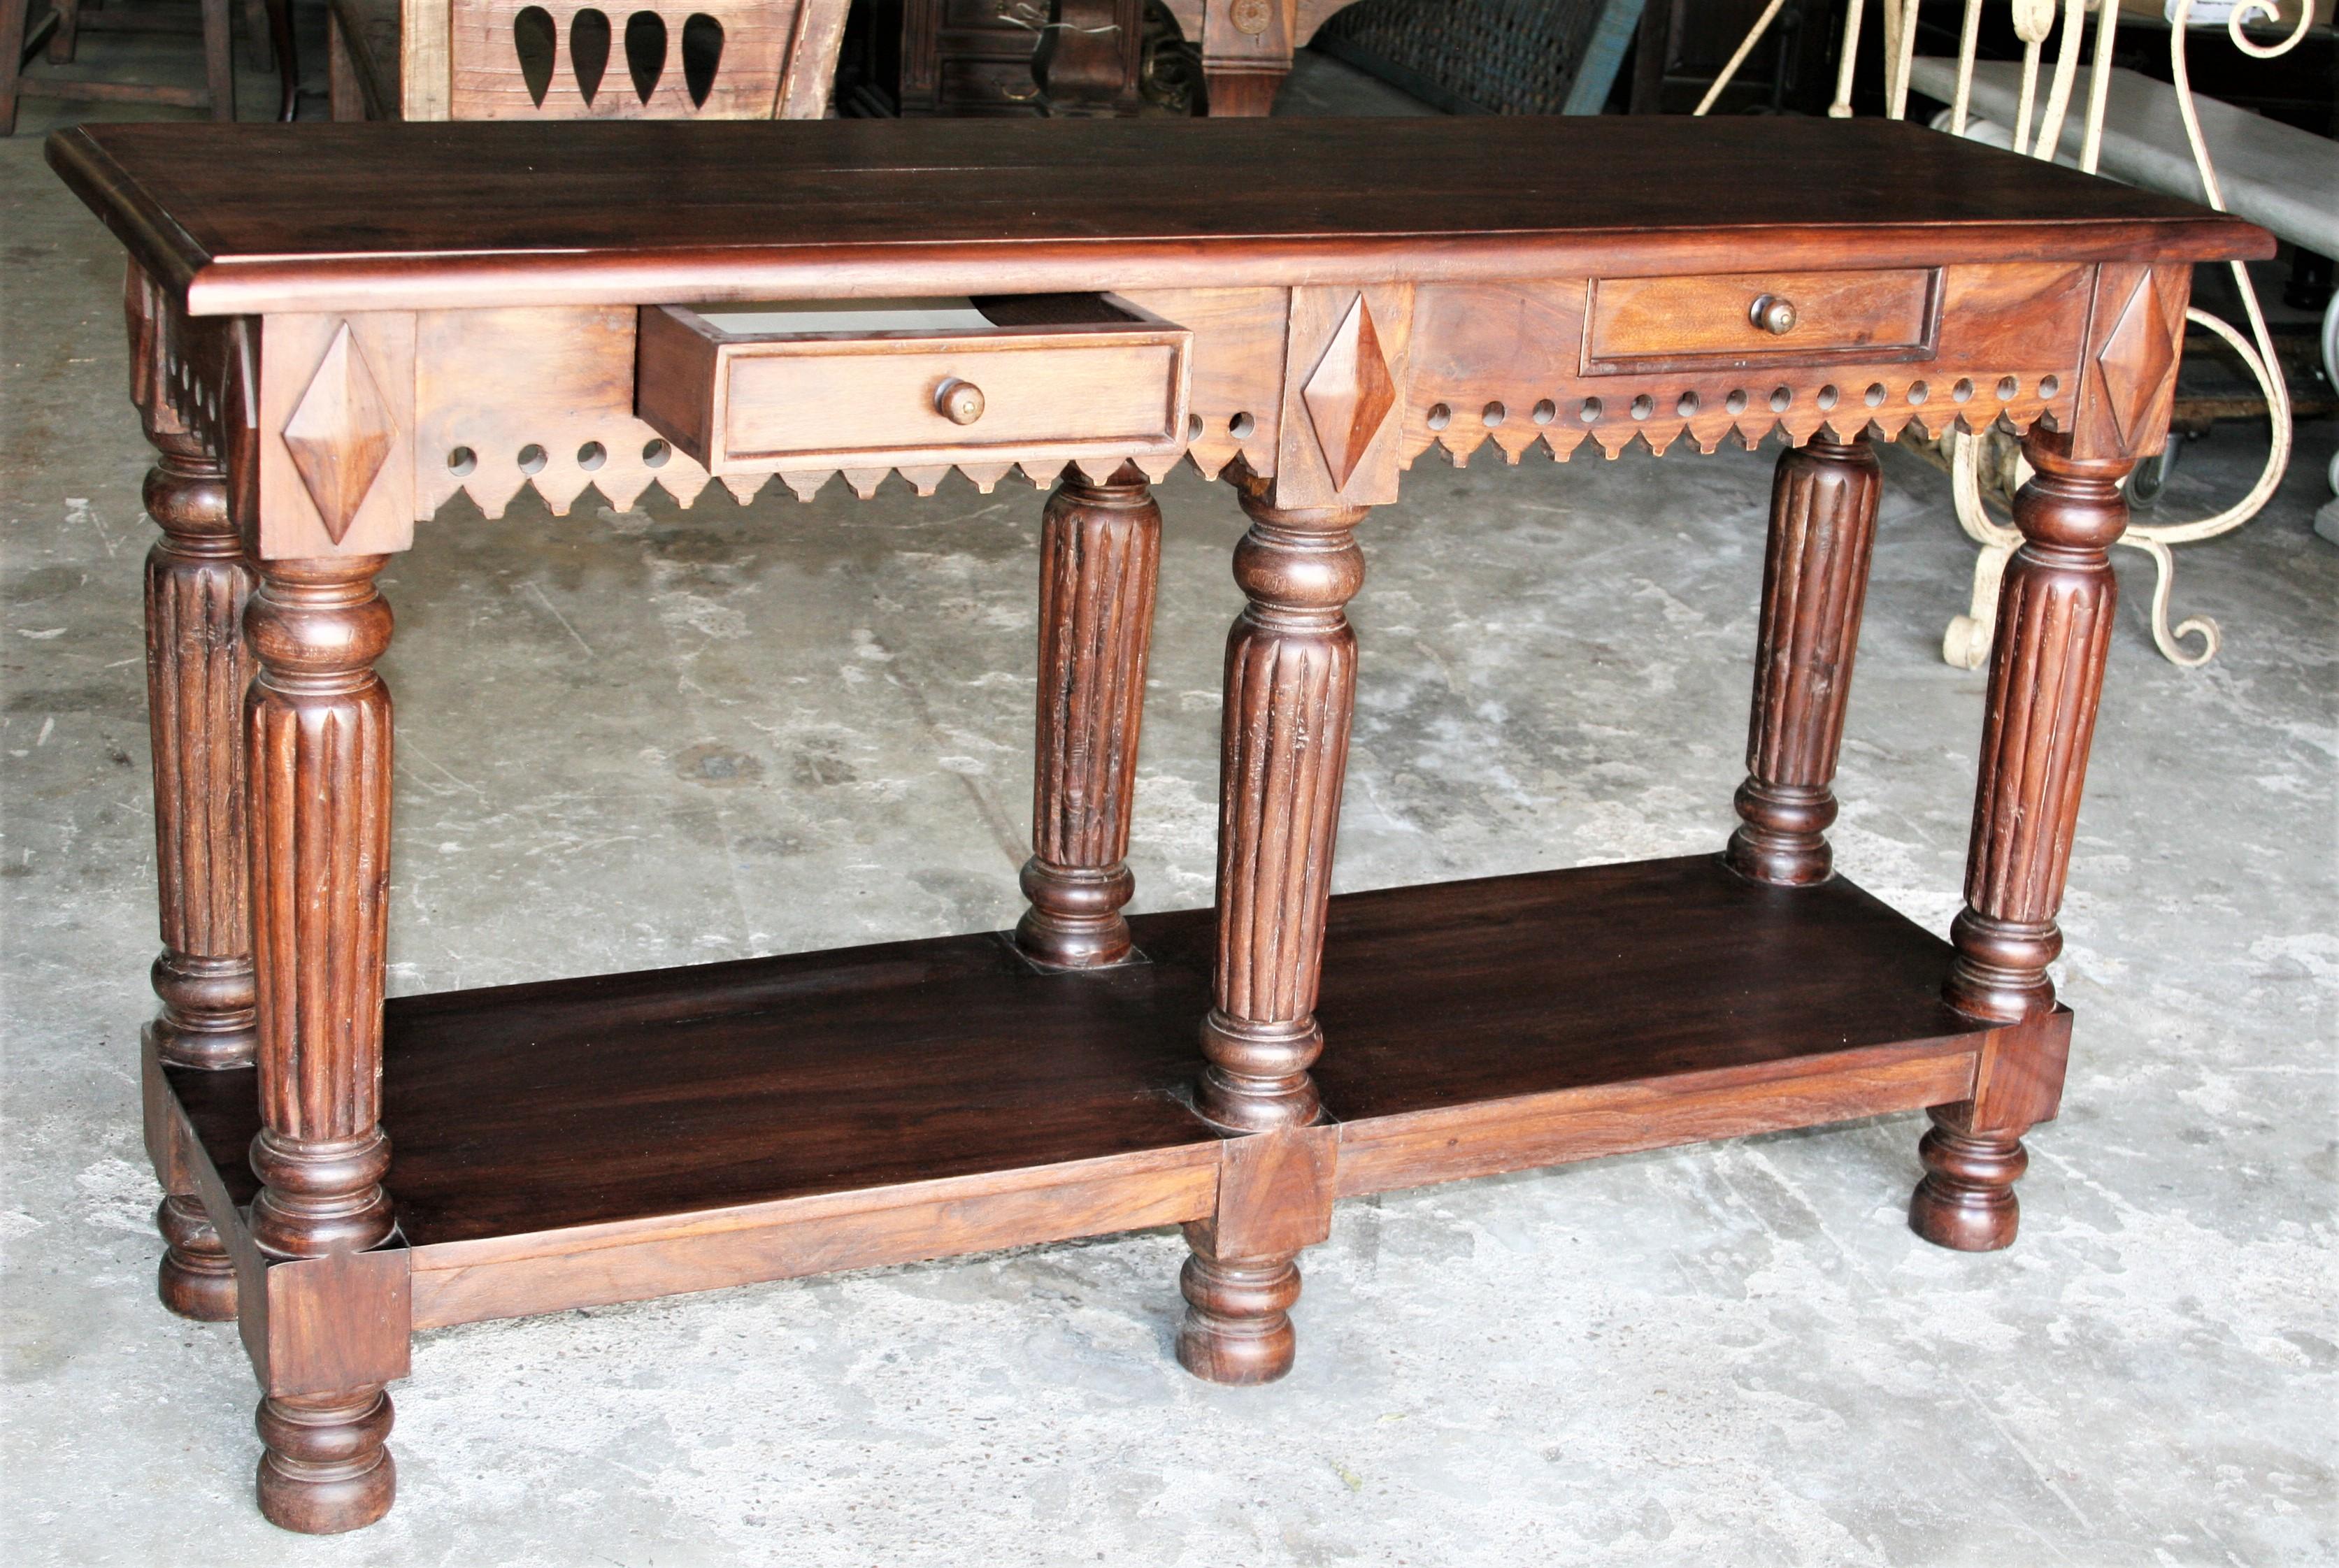 The design for this beautiful console table was influenced by the styles used in England. Very fine teak is used and typical of all furniture made in Asia at the time for European settlers, the table is heavily made using old world carpentry. It was